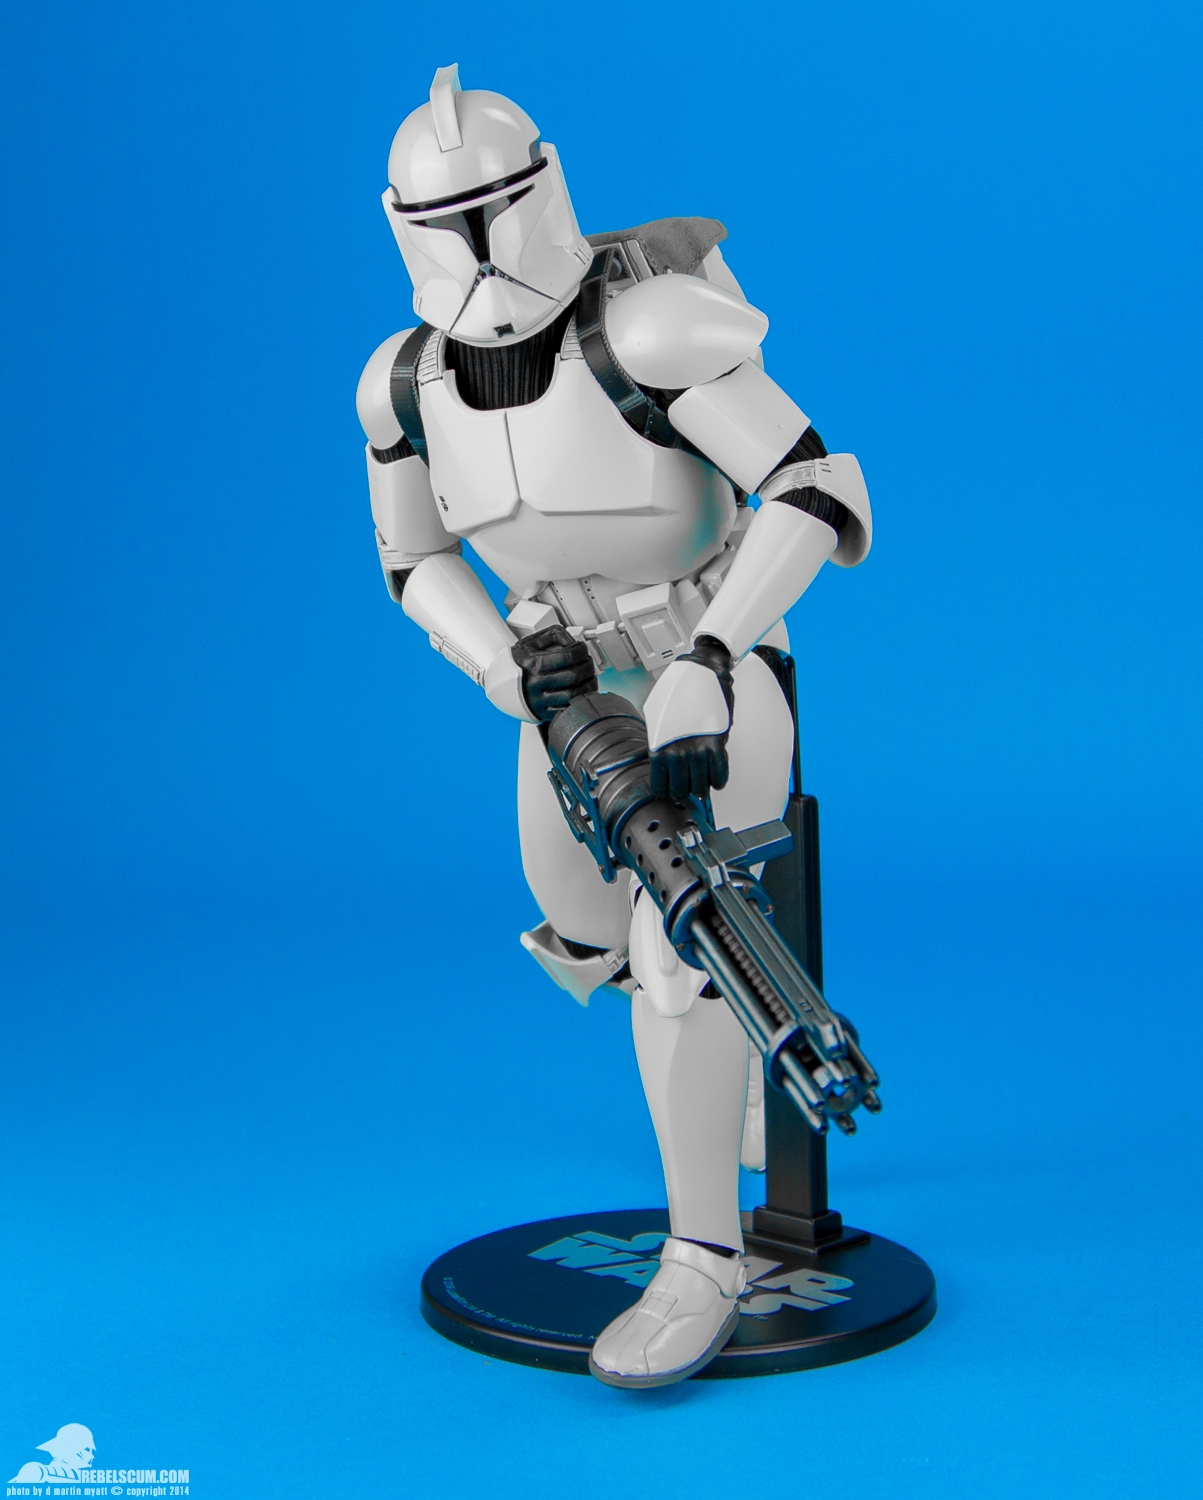 Shiny-Clone-Trooper-Deluxe-Sixth-Scale-Figure-Sideshow-018.jpg